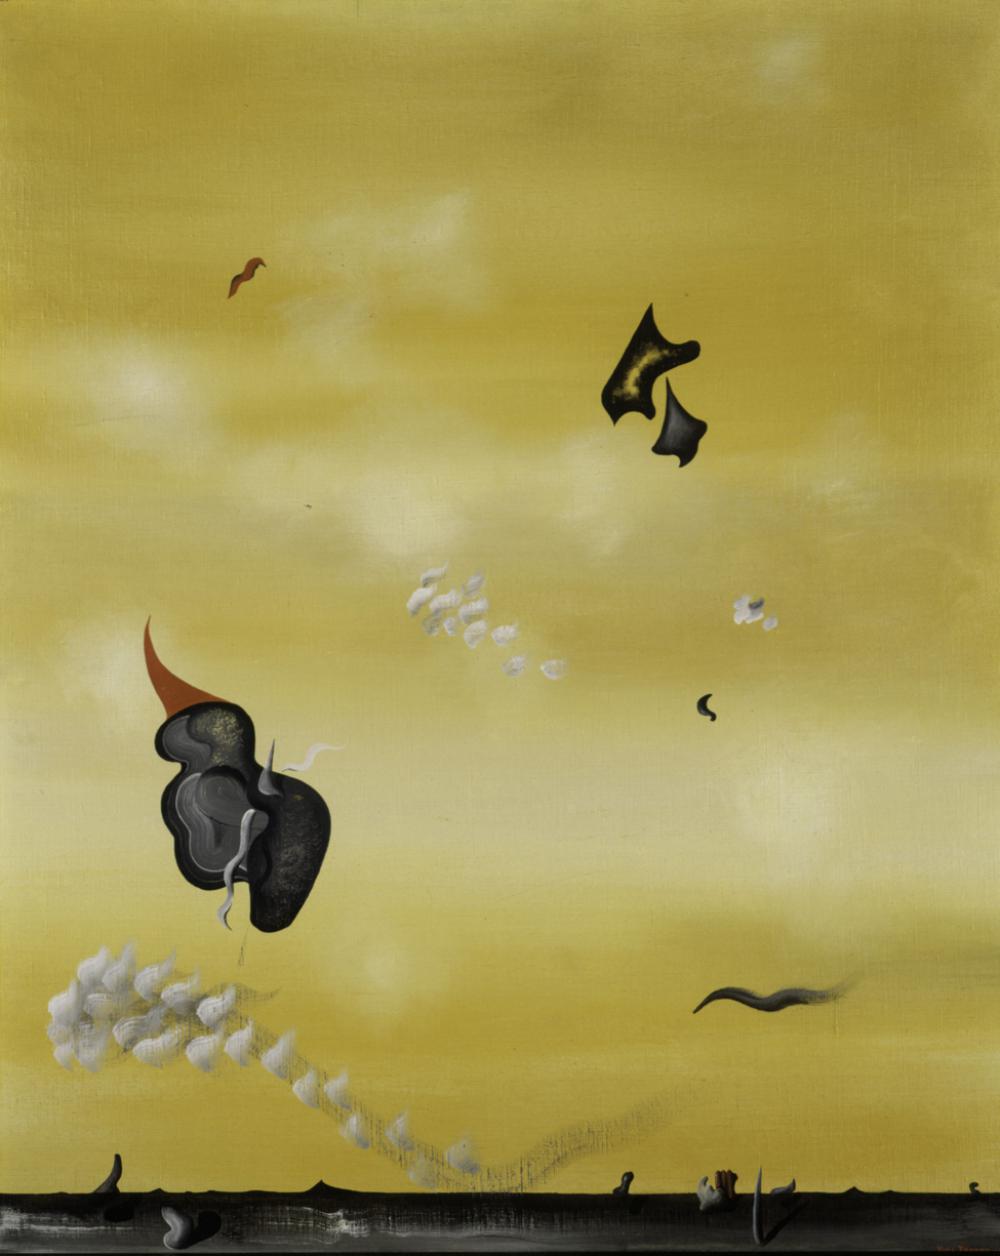 Yves Tanguy (French, 1900-1955), Lurid Sky, 1929